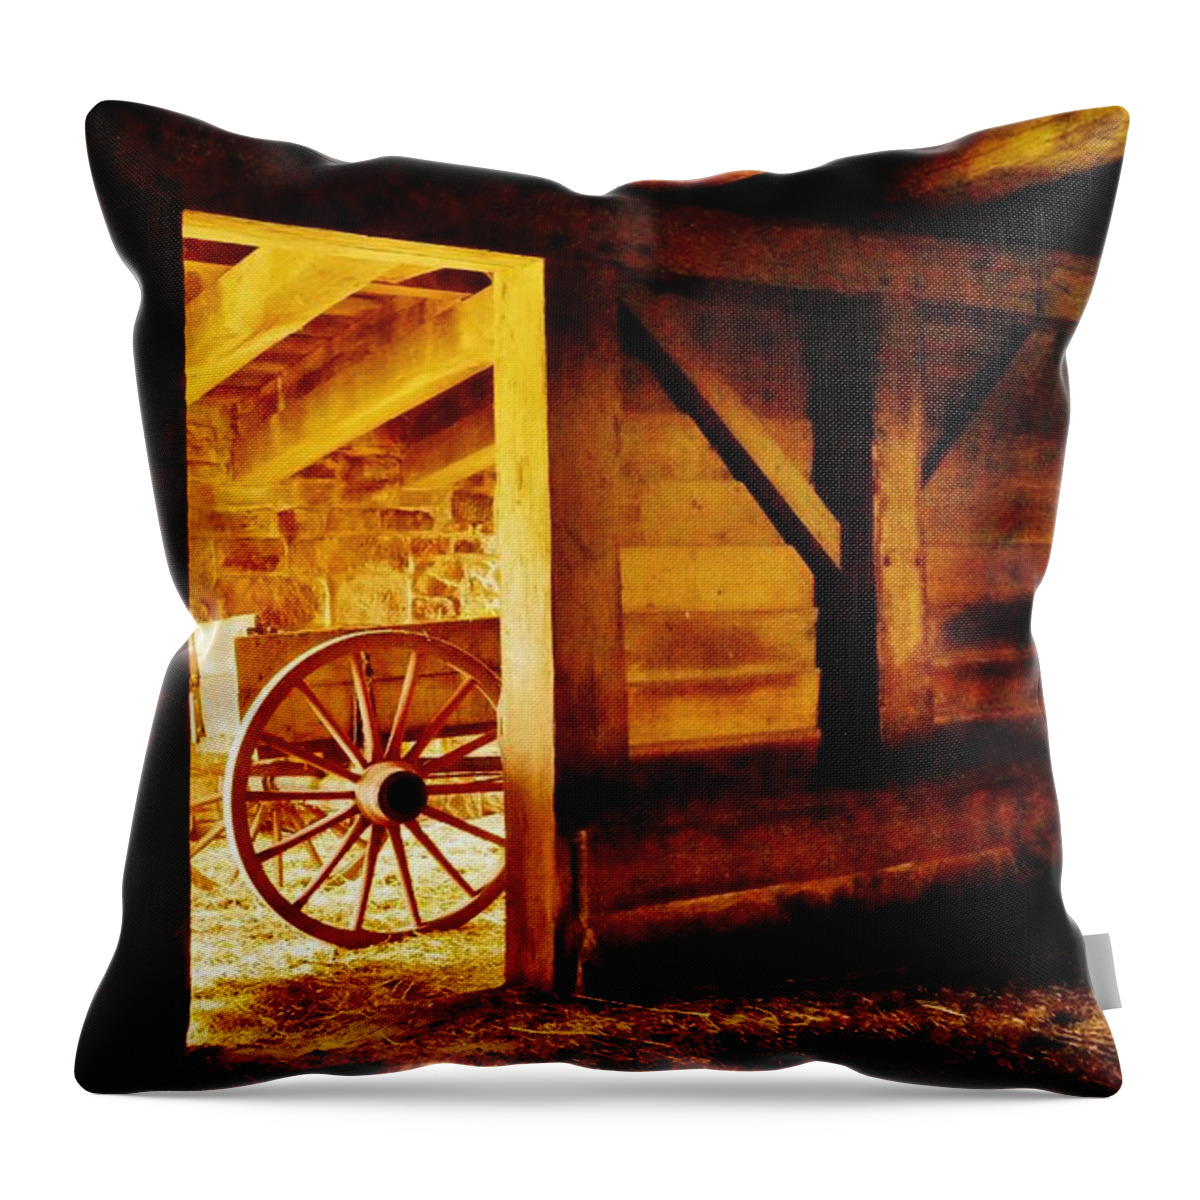 Firestone Throw Pillow featuring the photograph Doorway To The Past by Daniel Thompson